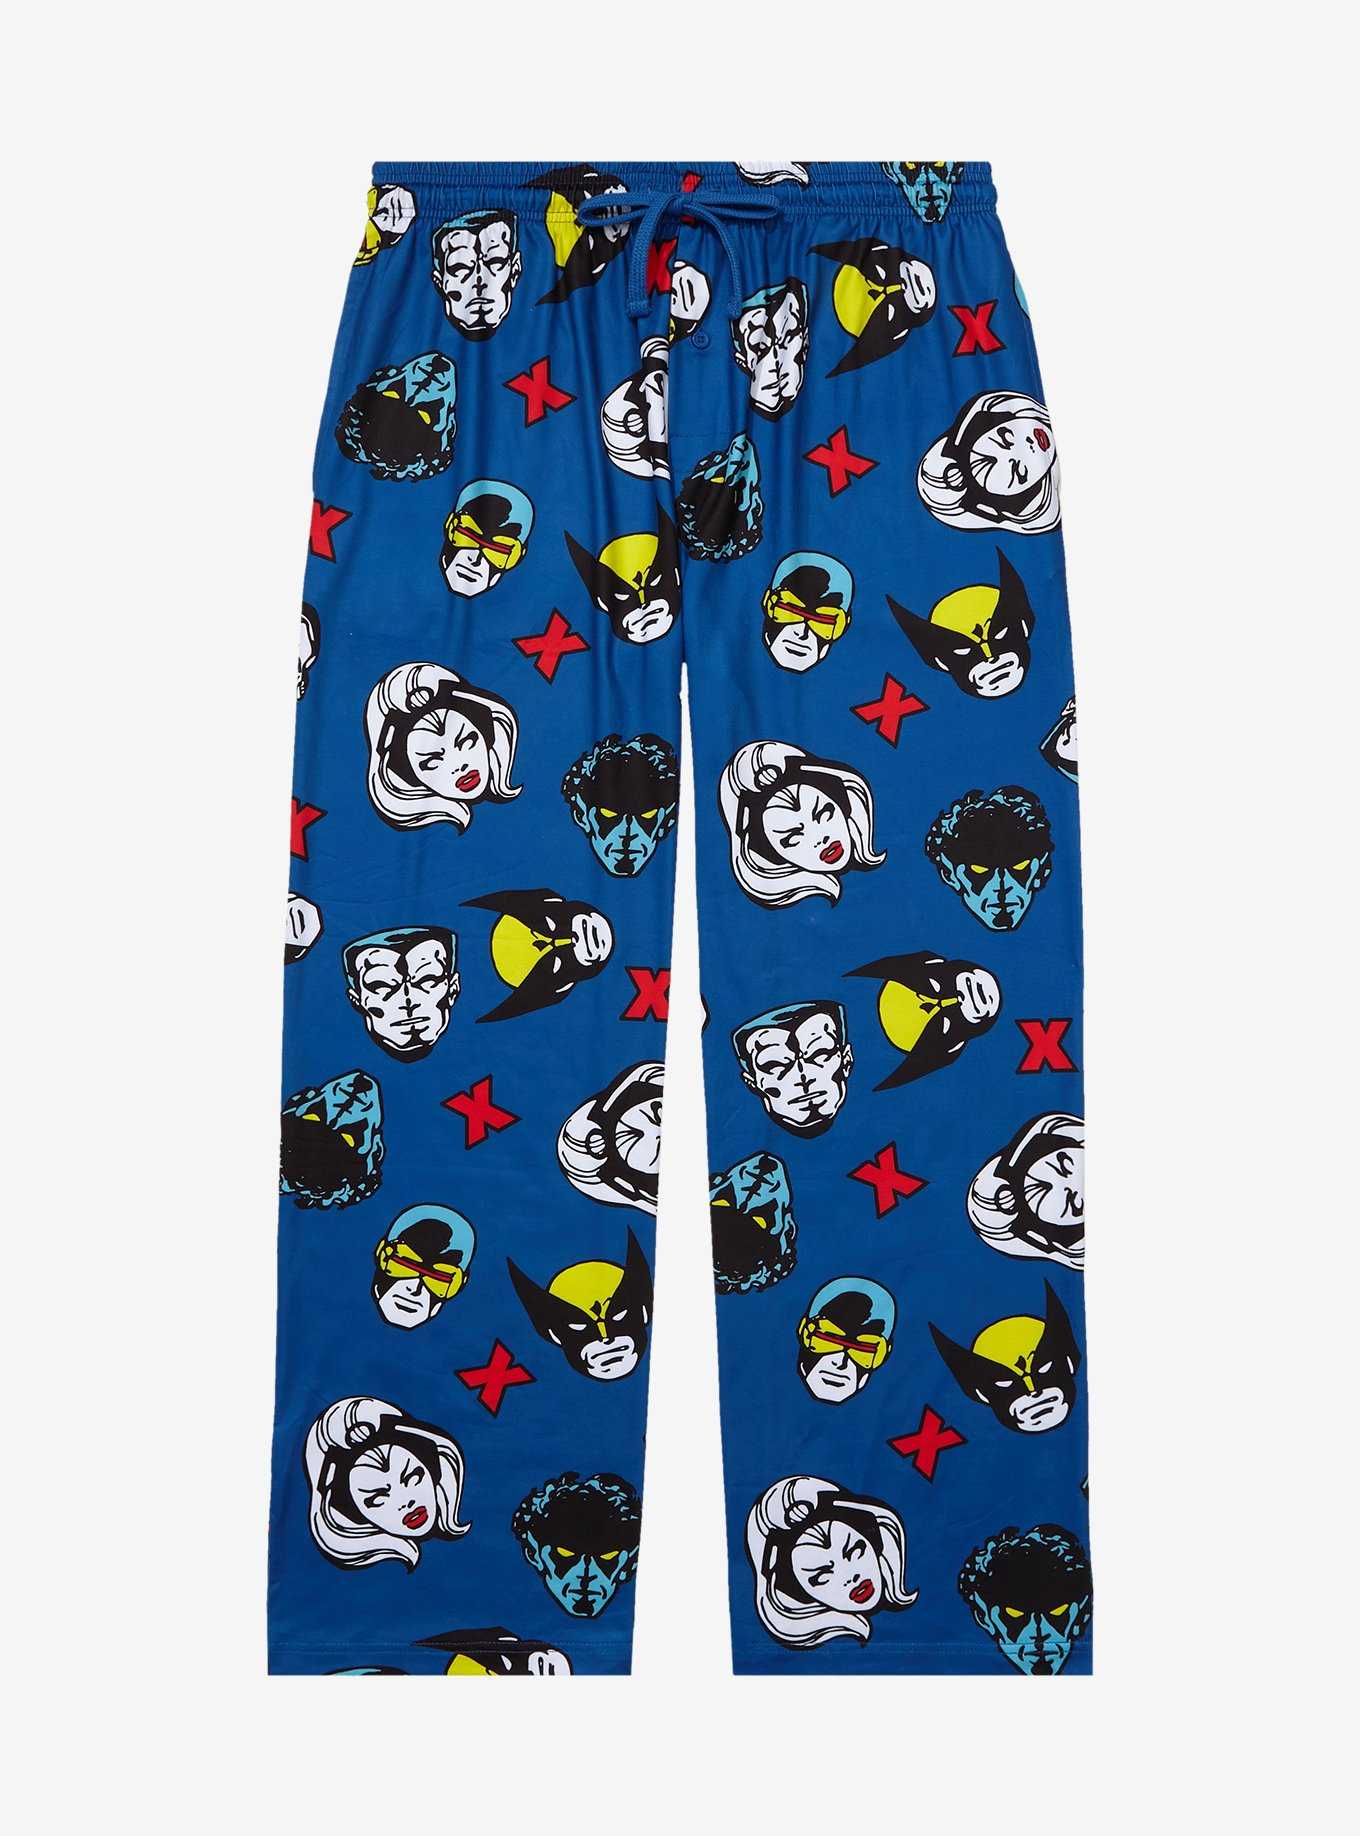 Marvel X-Men Character Portraits Allover Print Plus Size Sleep Pants - BoxLunch Exclusive, , hi-res